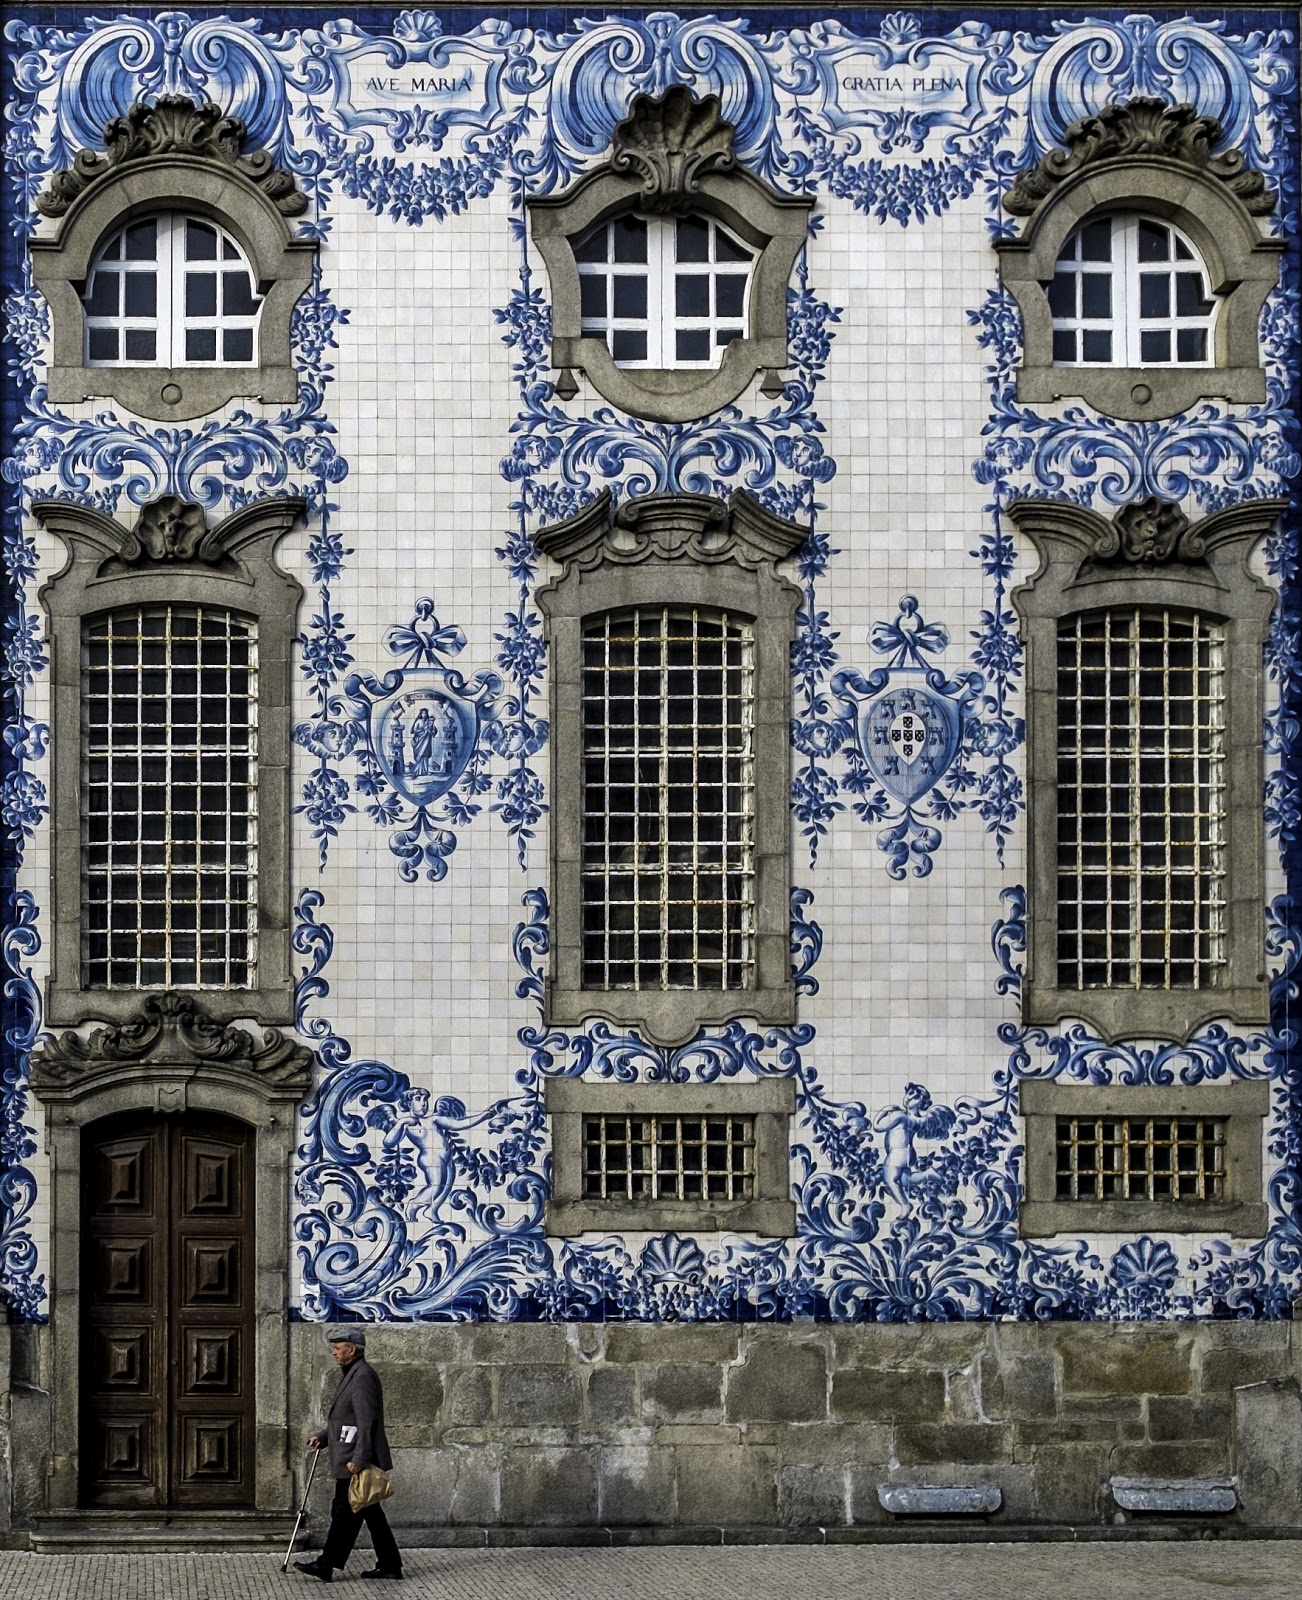 Painted tiles on a building in Portugal.